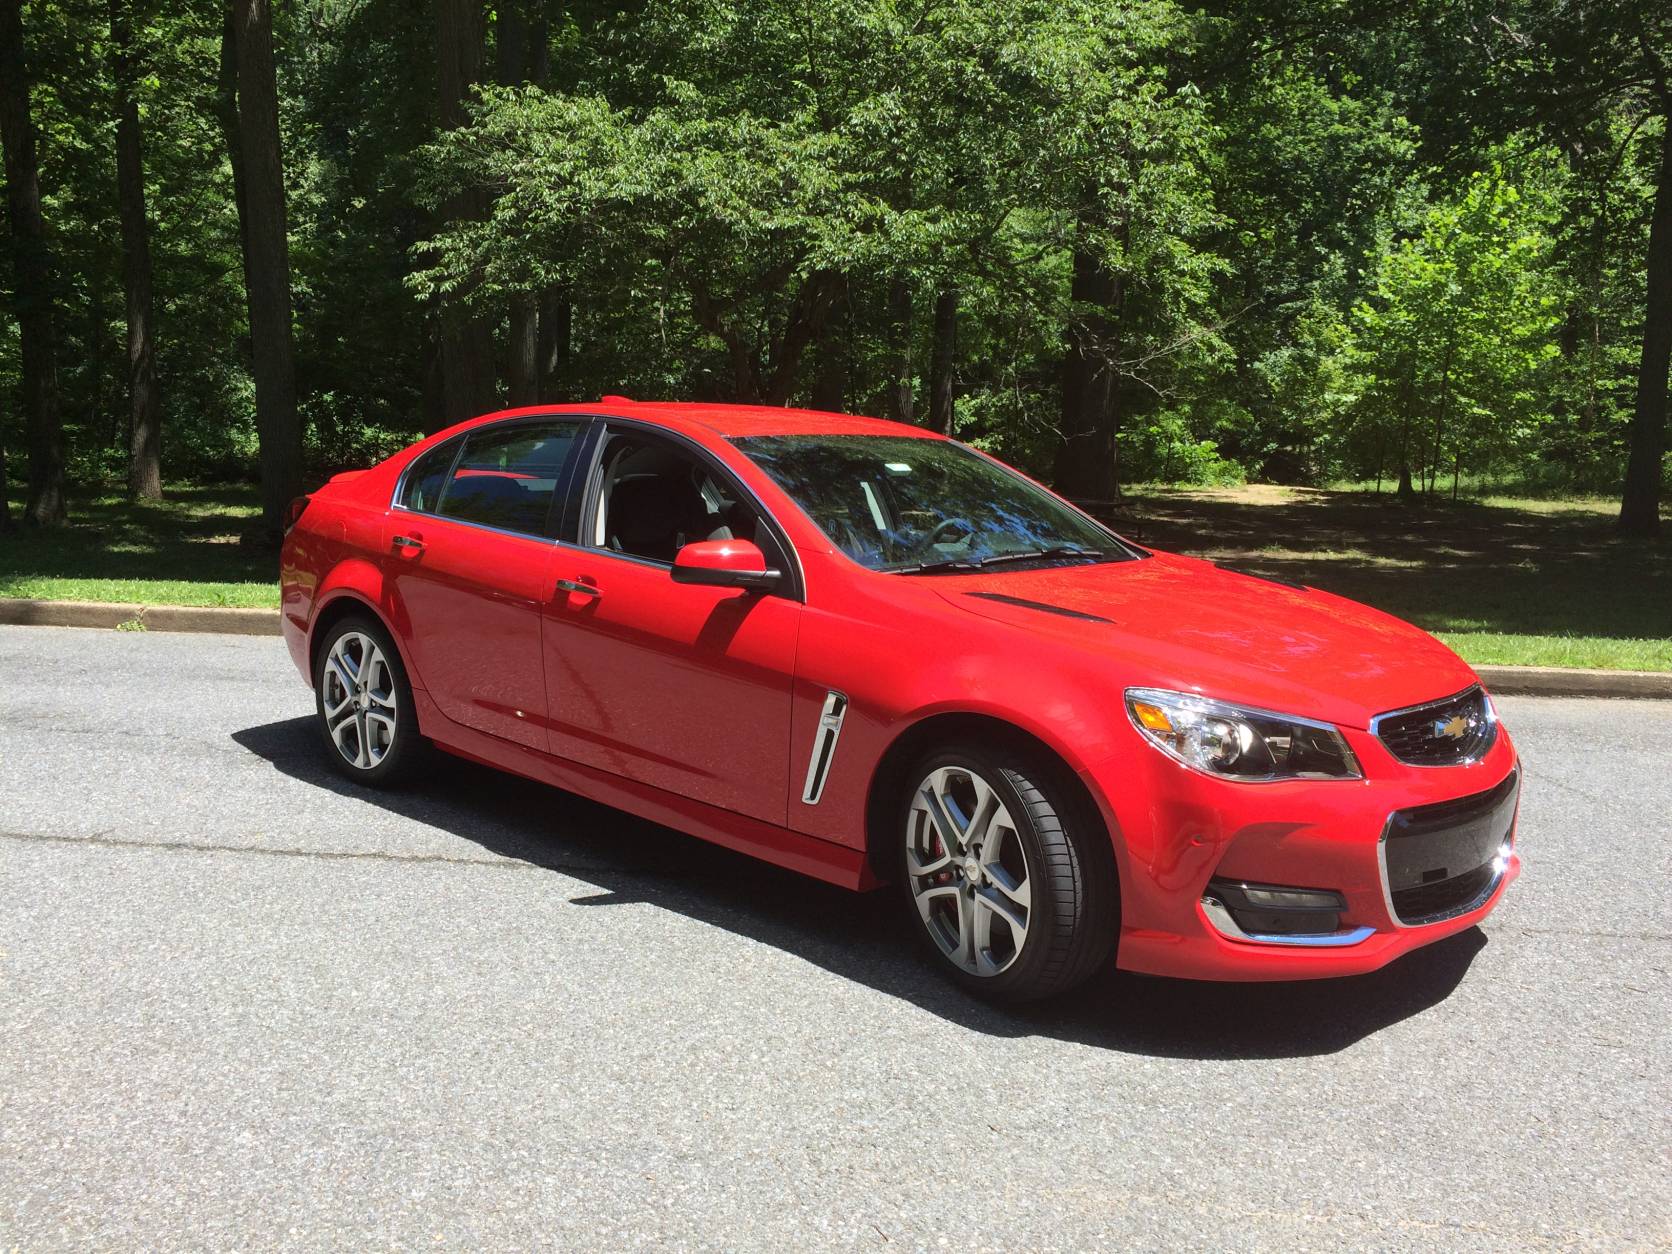 The Chevrolet SS sedan, a fun to drive sedan, does a good job as a family car and doubles as a track car on the weekends. (WTOP/Mike Parris)